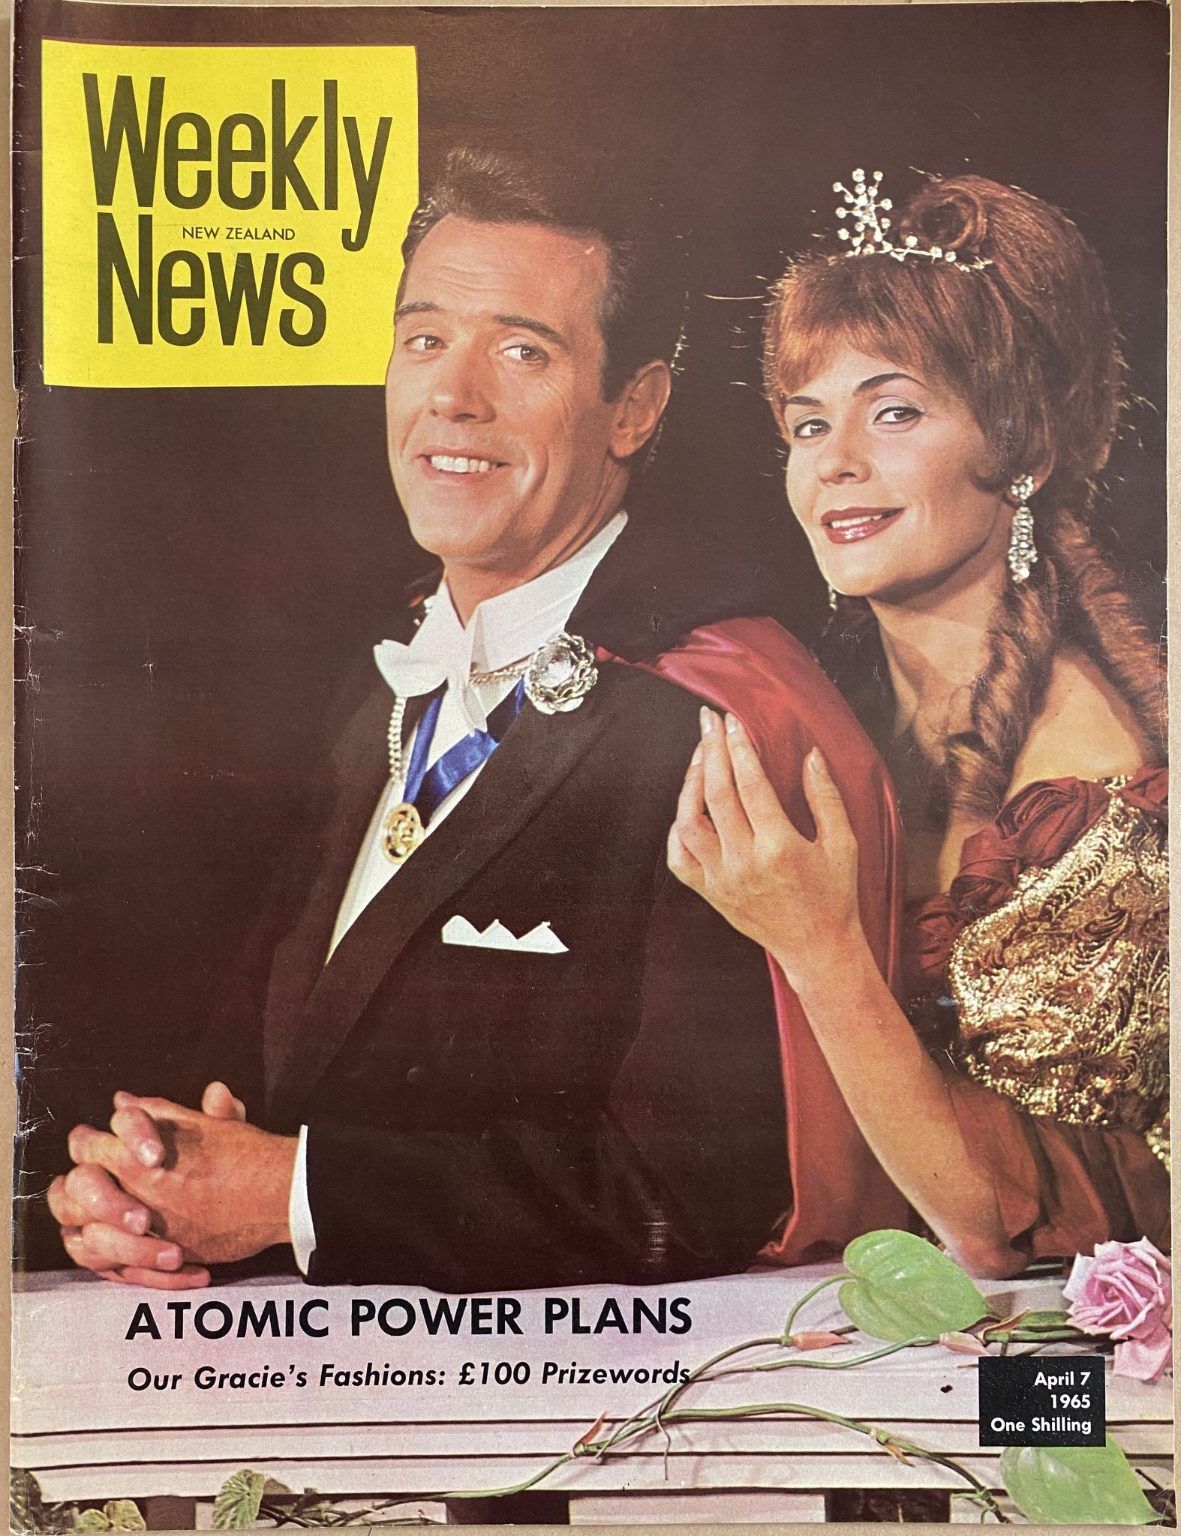 OLD NEWSPAPER: New Zealand Weekly News, No. 5289, 7 April 1965